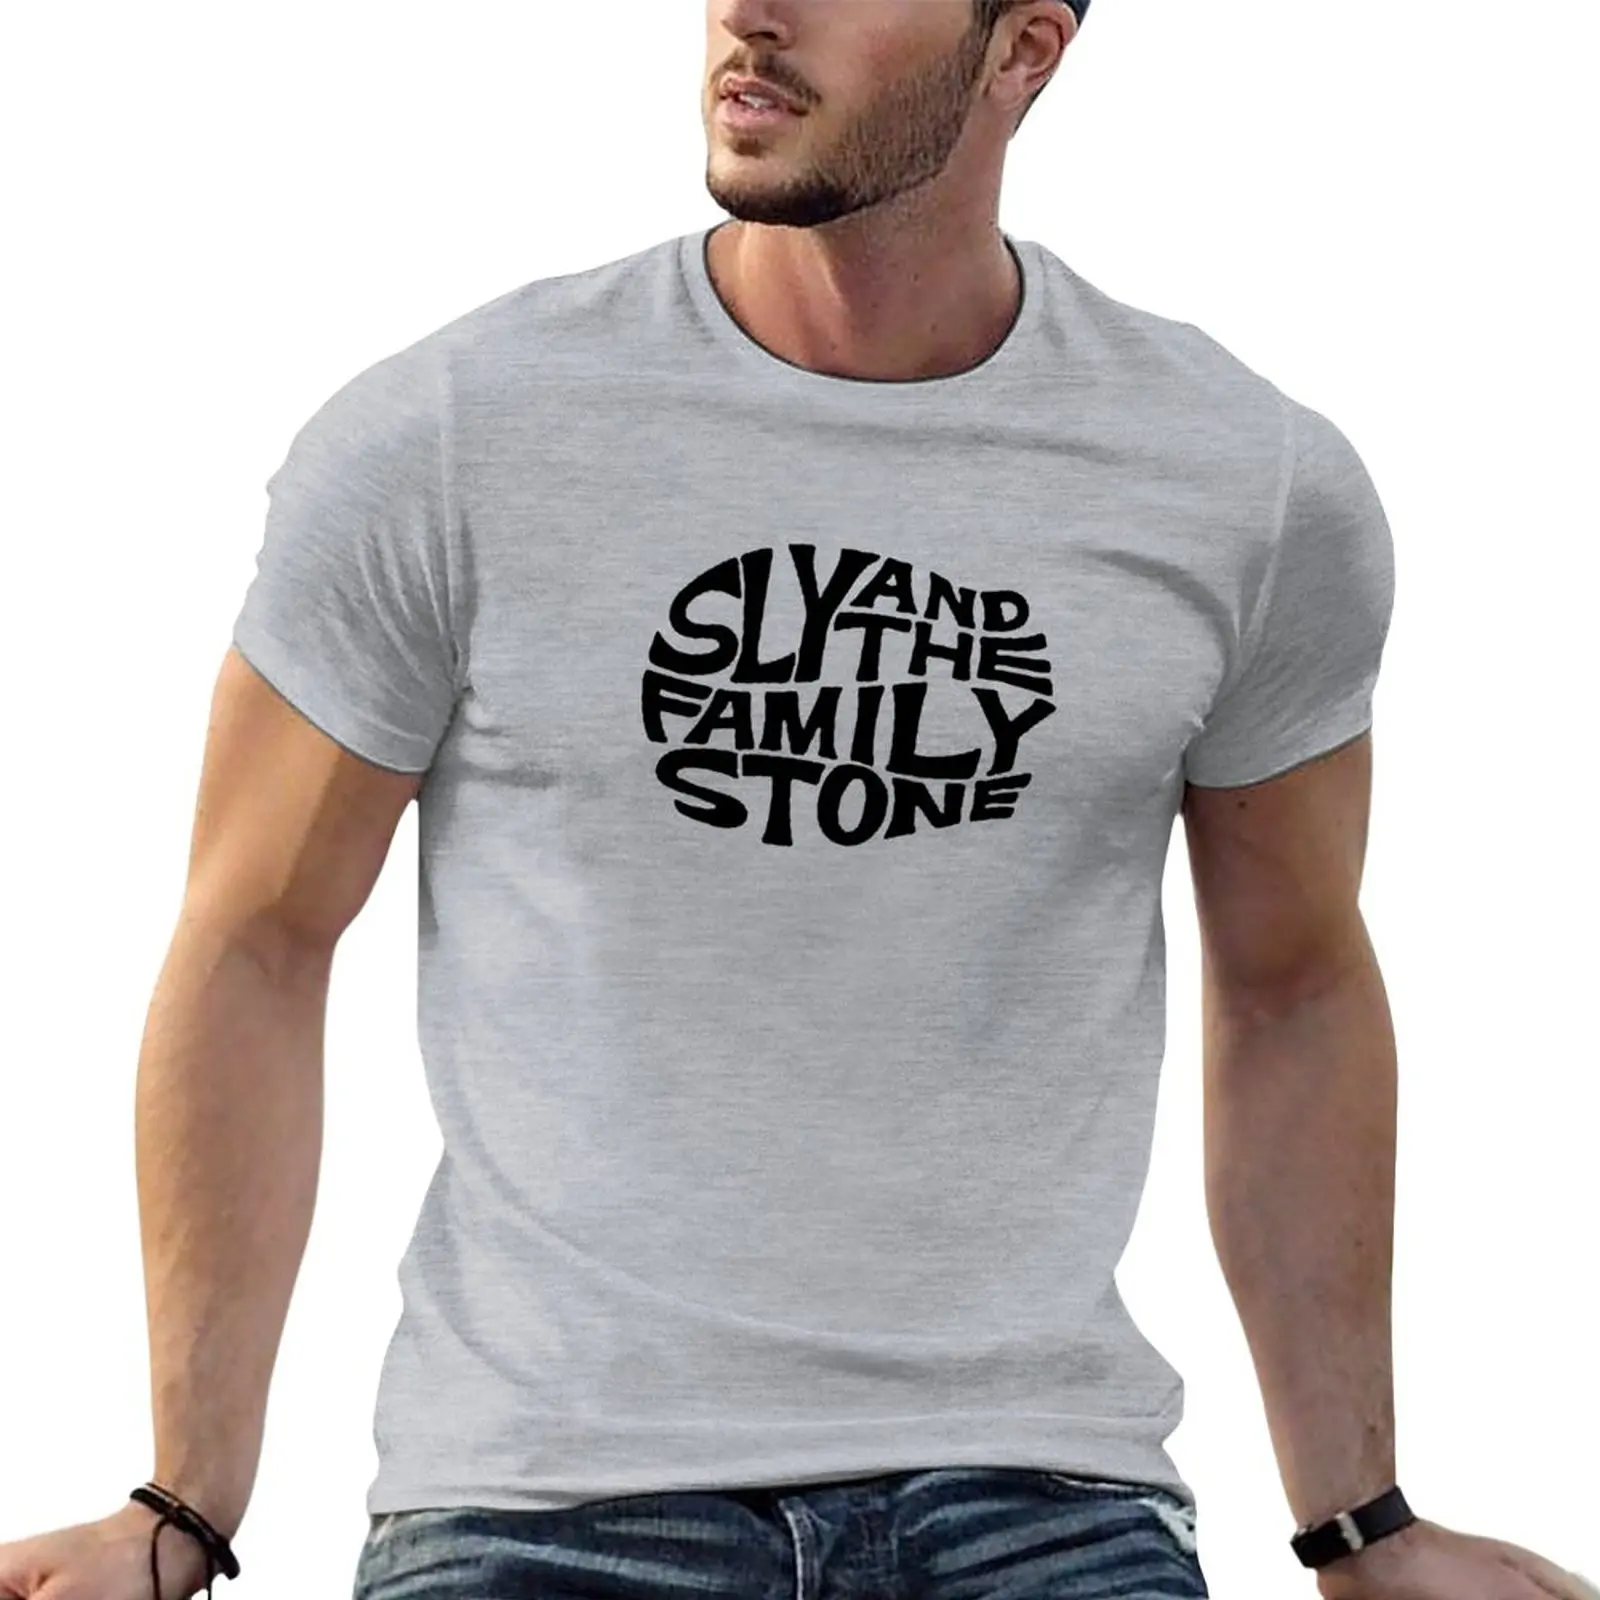 New Sly and the Family Stone T-Shirt summer tops cute tops shirts graphic tees black t-shirts for men